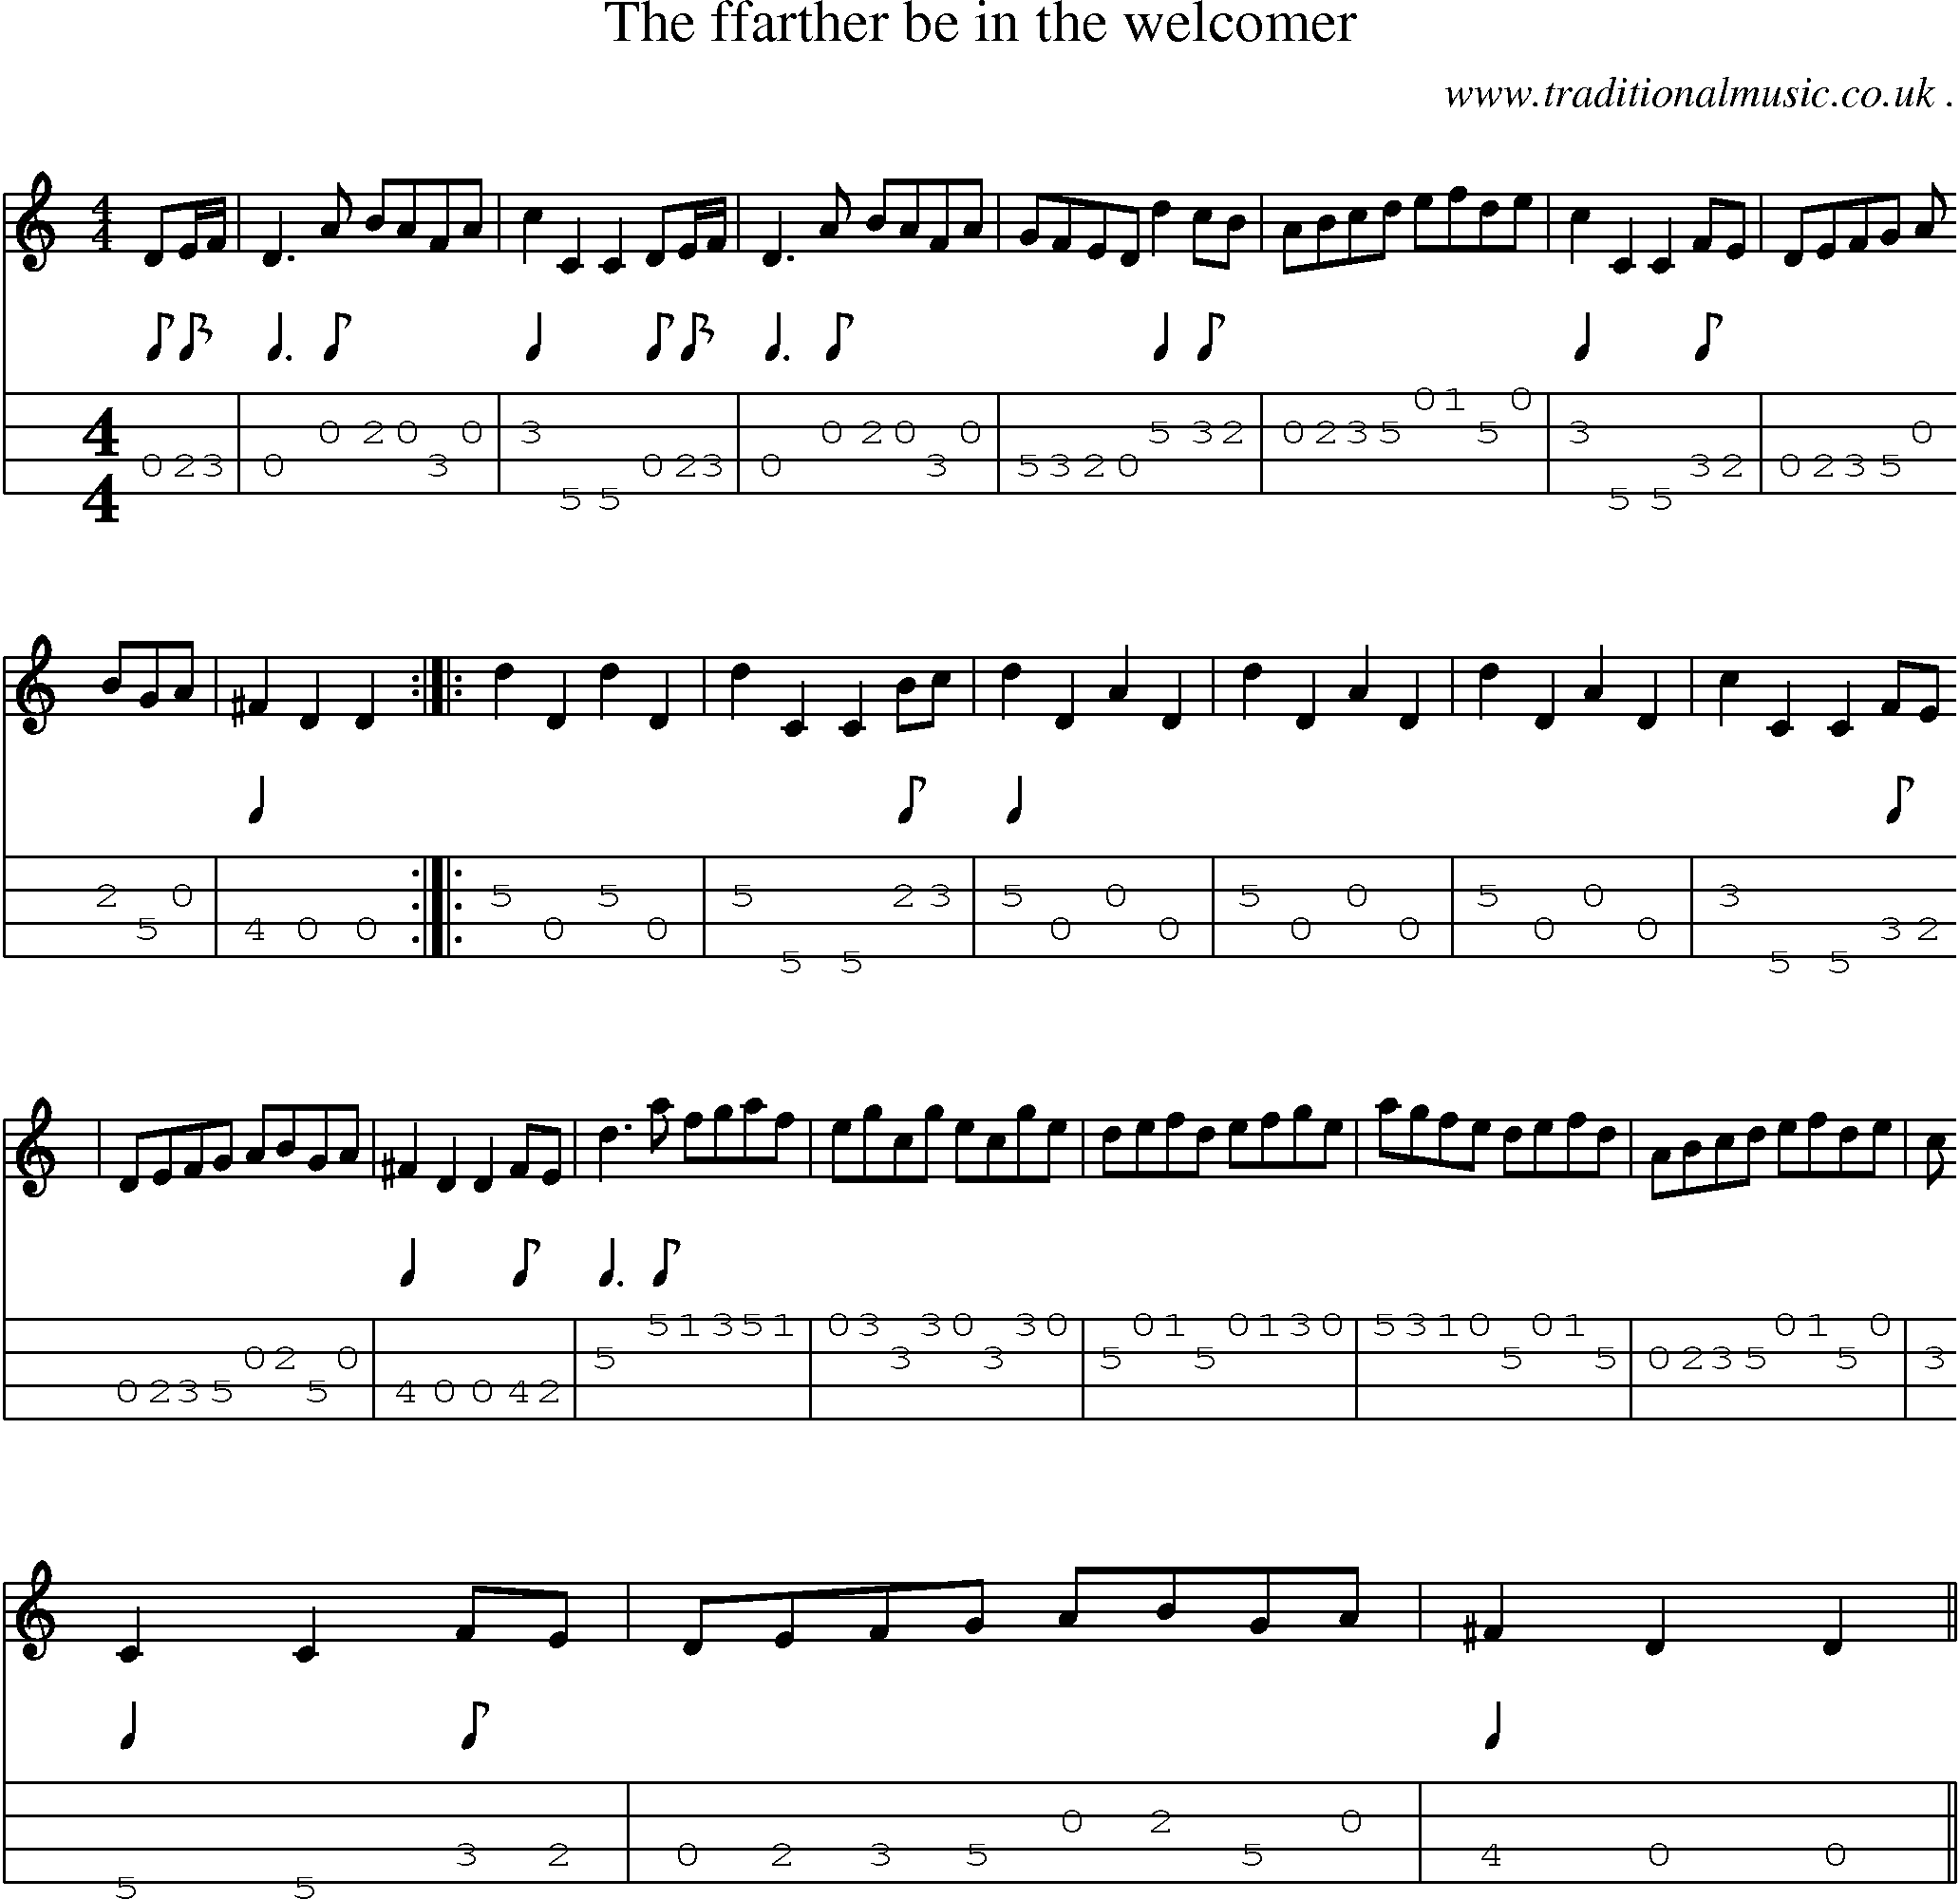 Sheet-Music and Mandolin Tabs for The Ffarther Be In The Welcomer